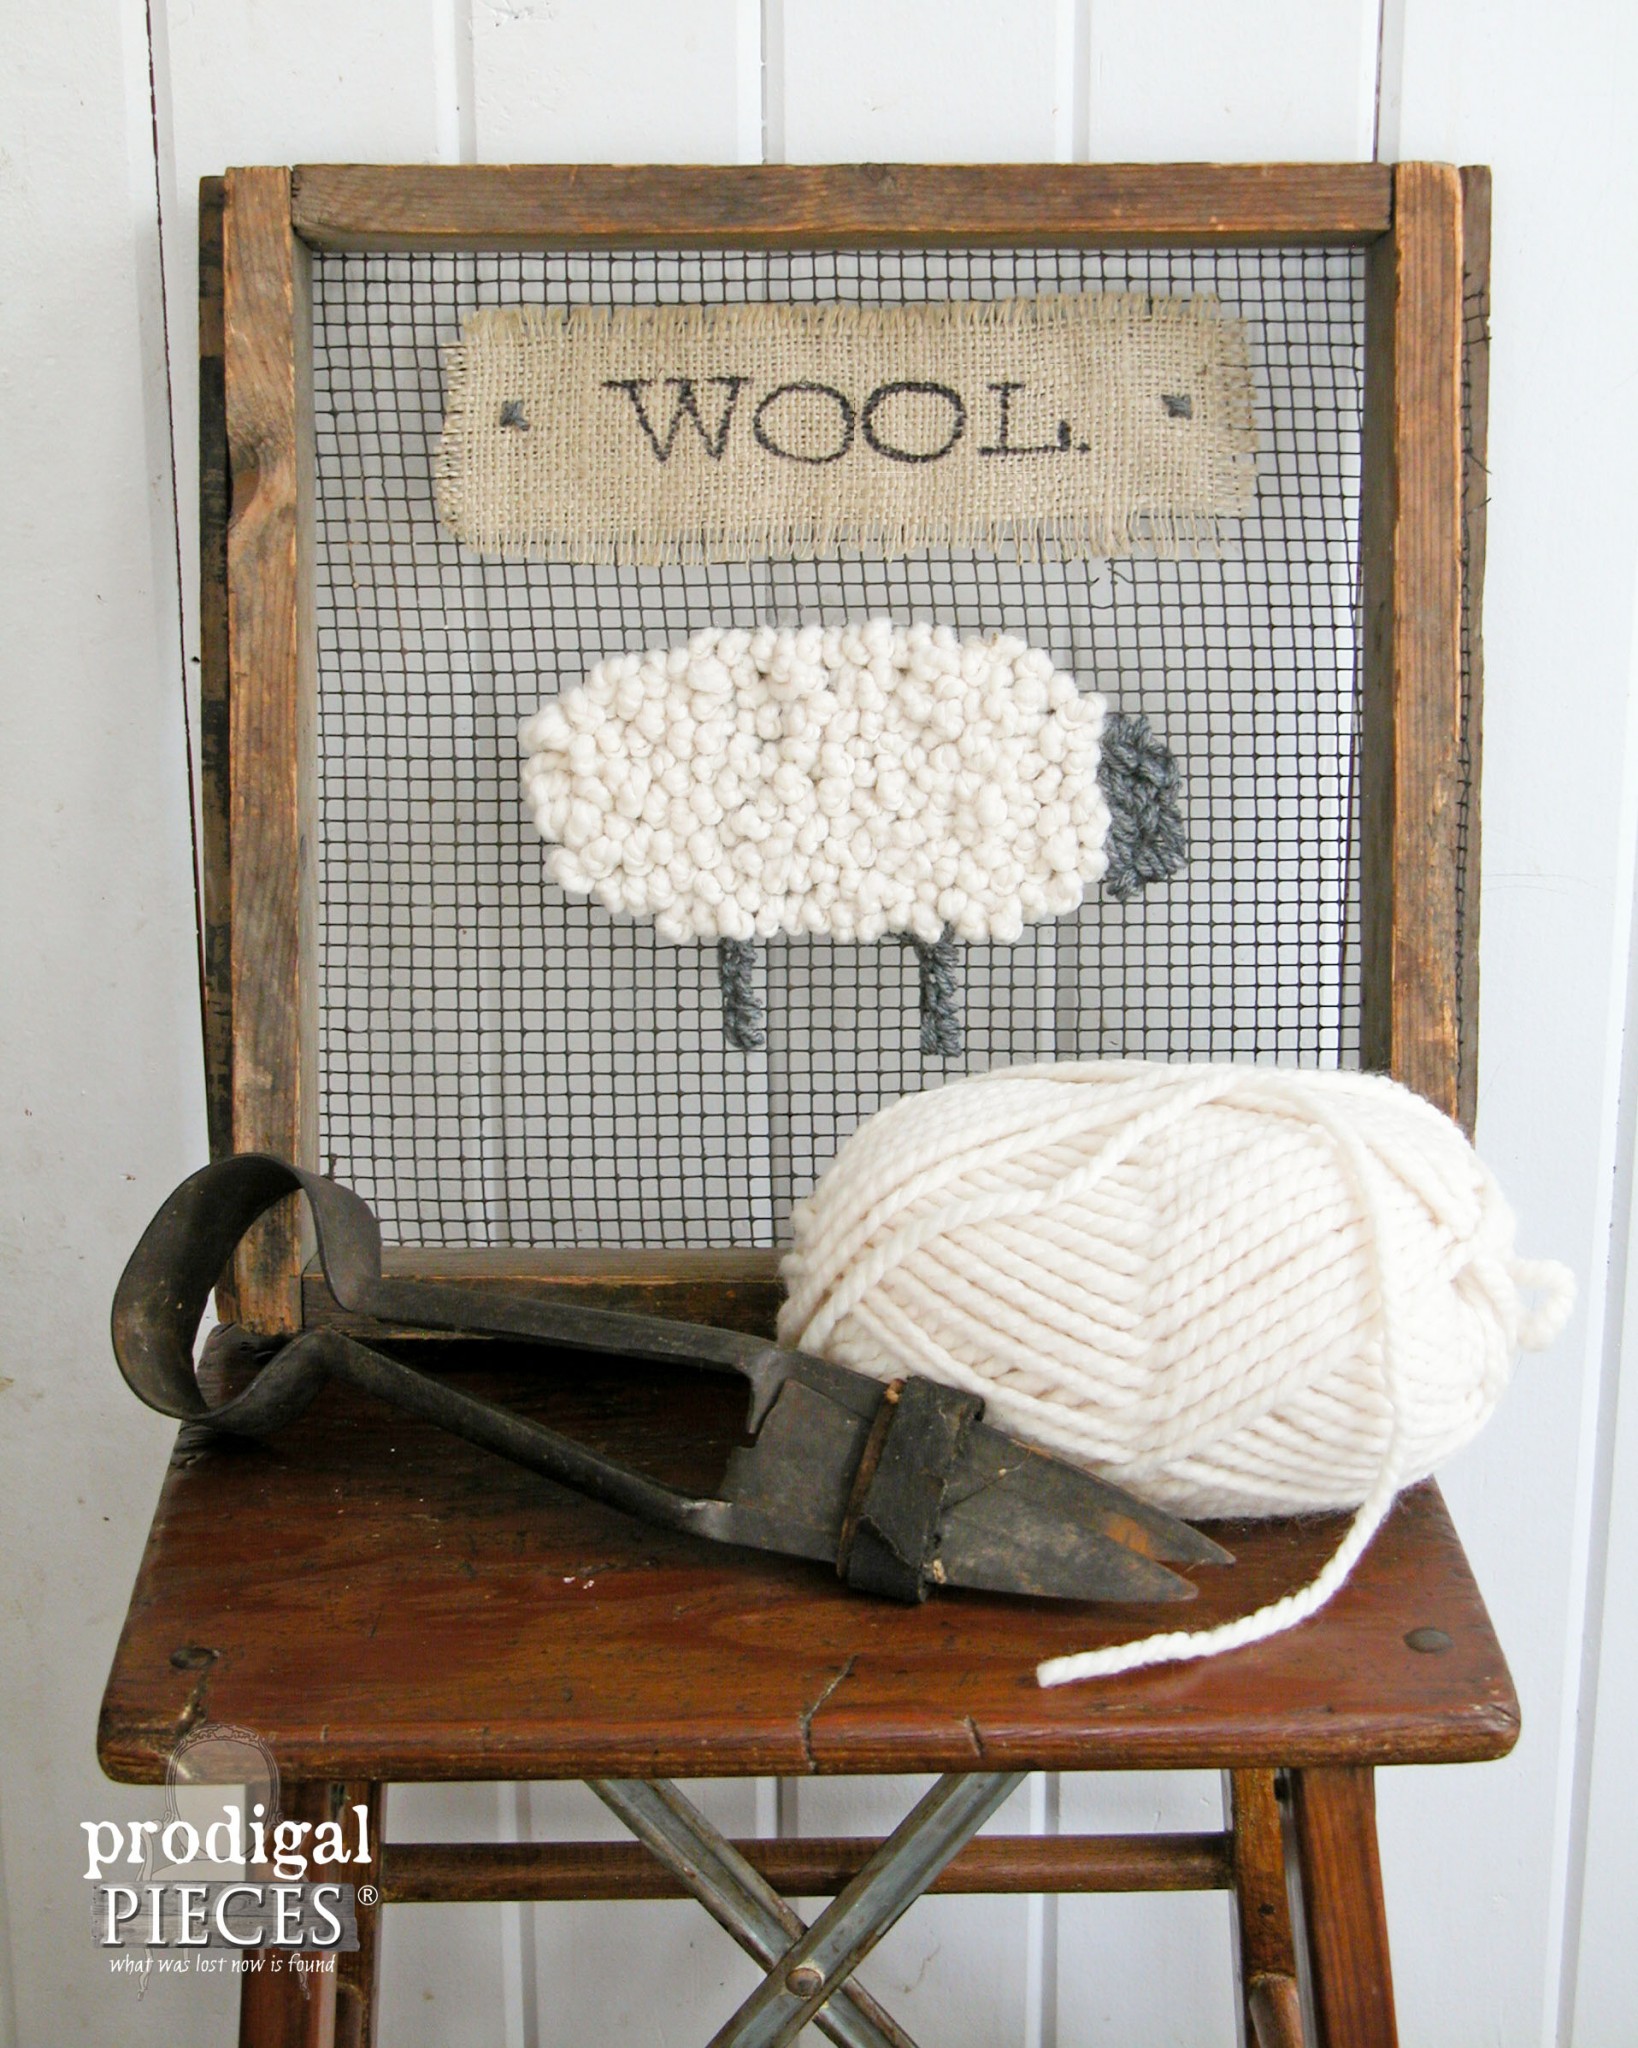 Repurposed Farmhouse Sifter Turned Wooly Sign by Prodigal Pieces | www.prodigalpieces.com